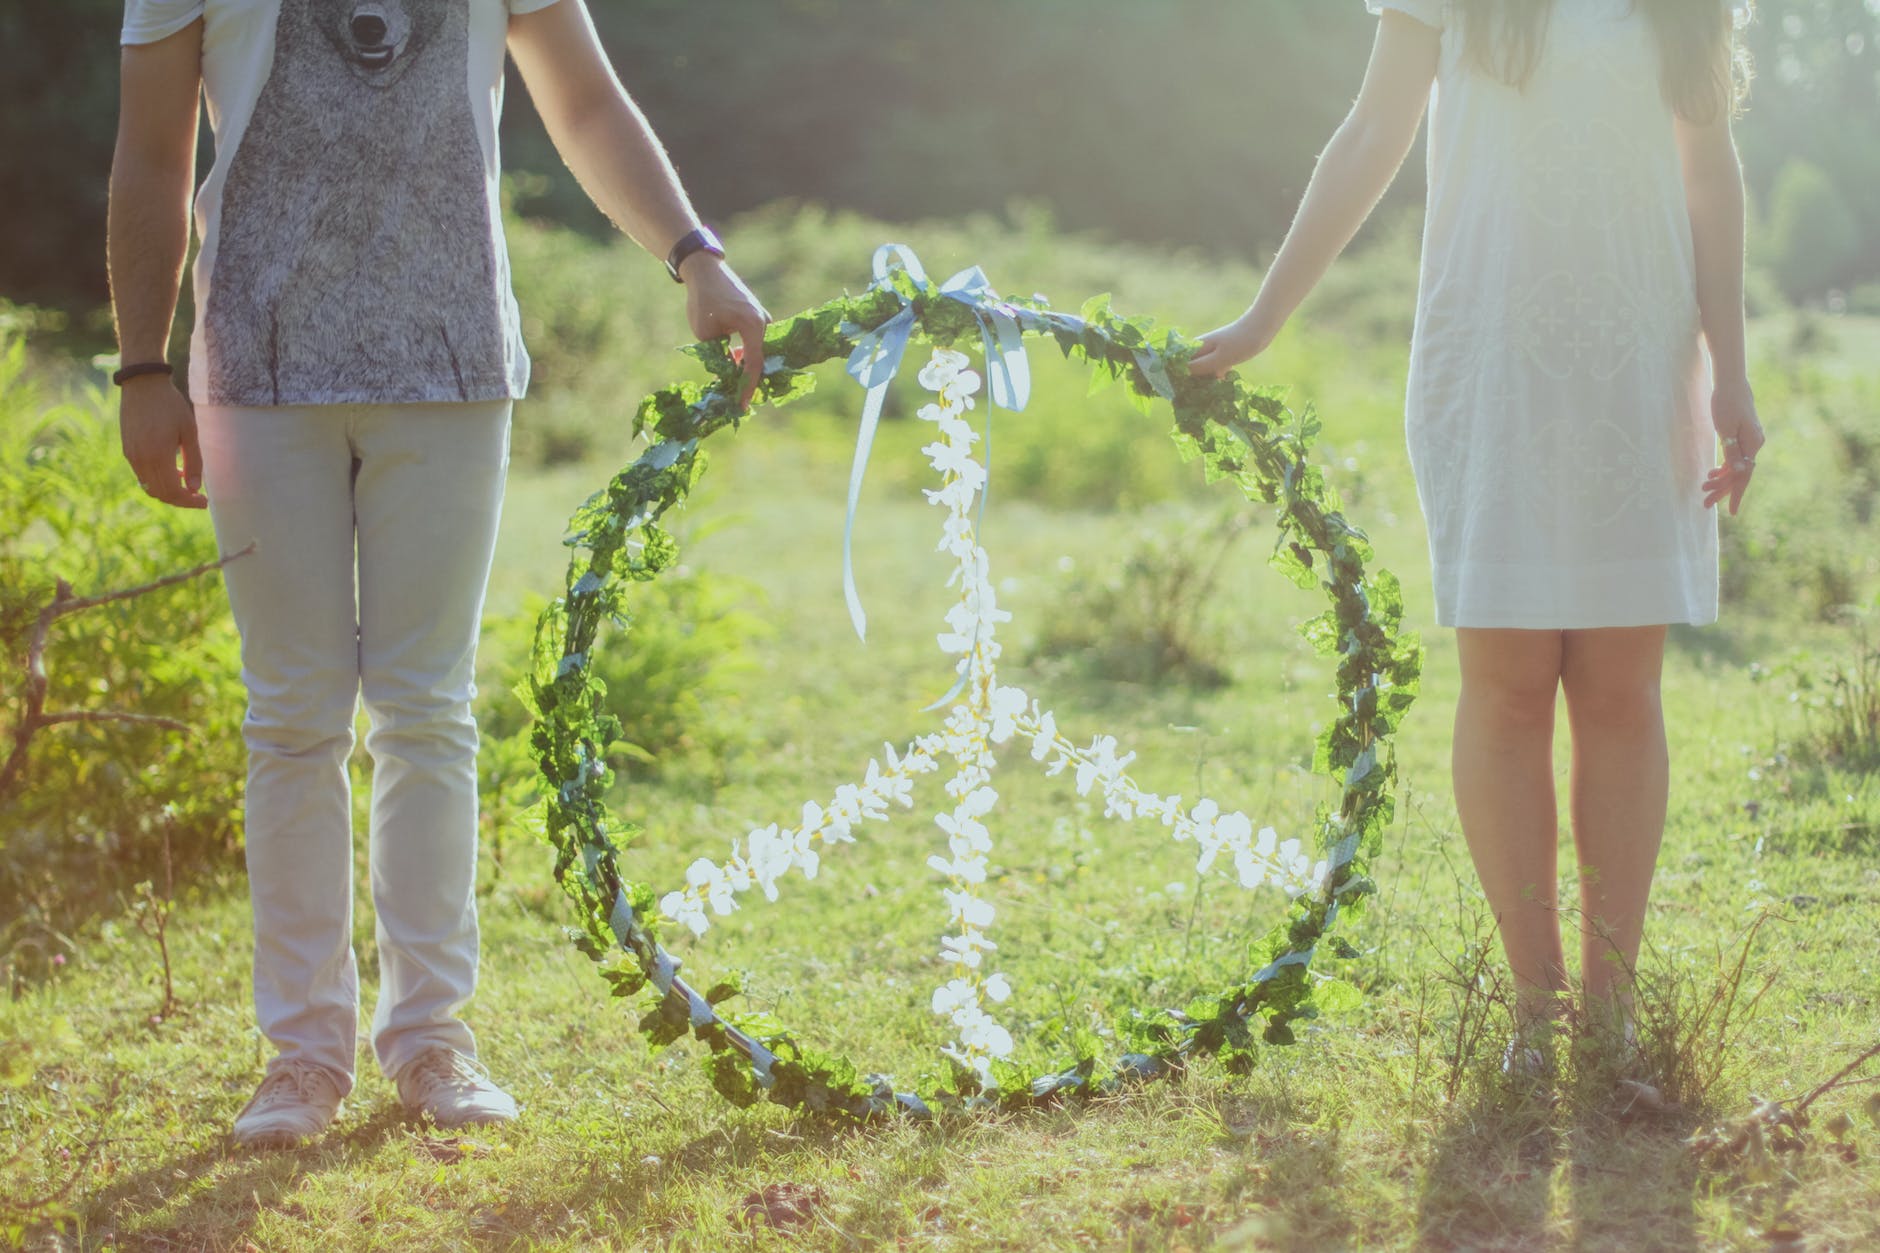 Two people (from the shoulders down) holding a hoop containing the international symbol for peace made with white flowers, surrounded by green flowers. They stand in a green field in sunlight.